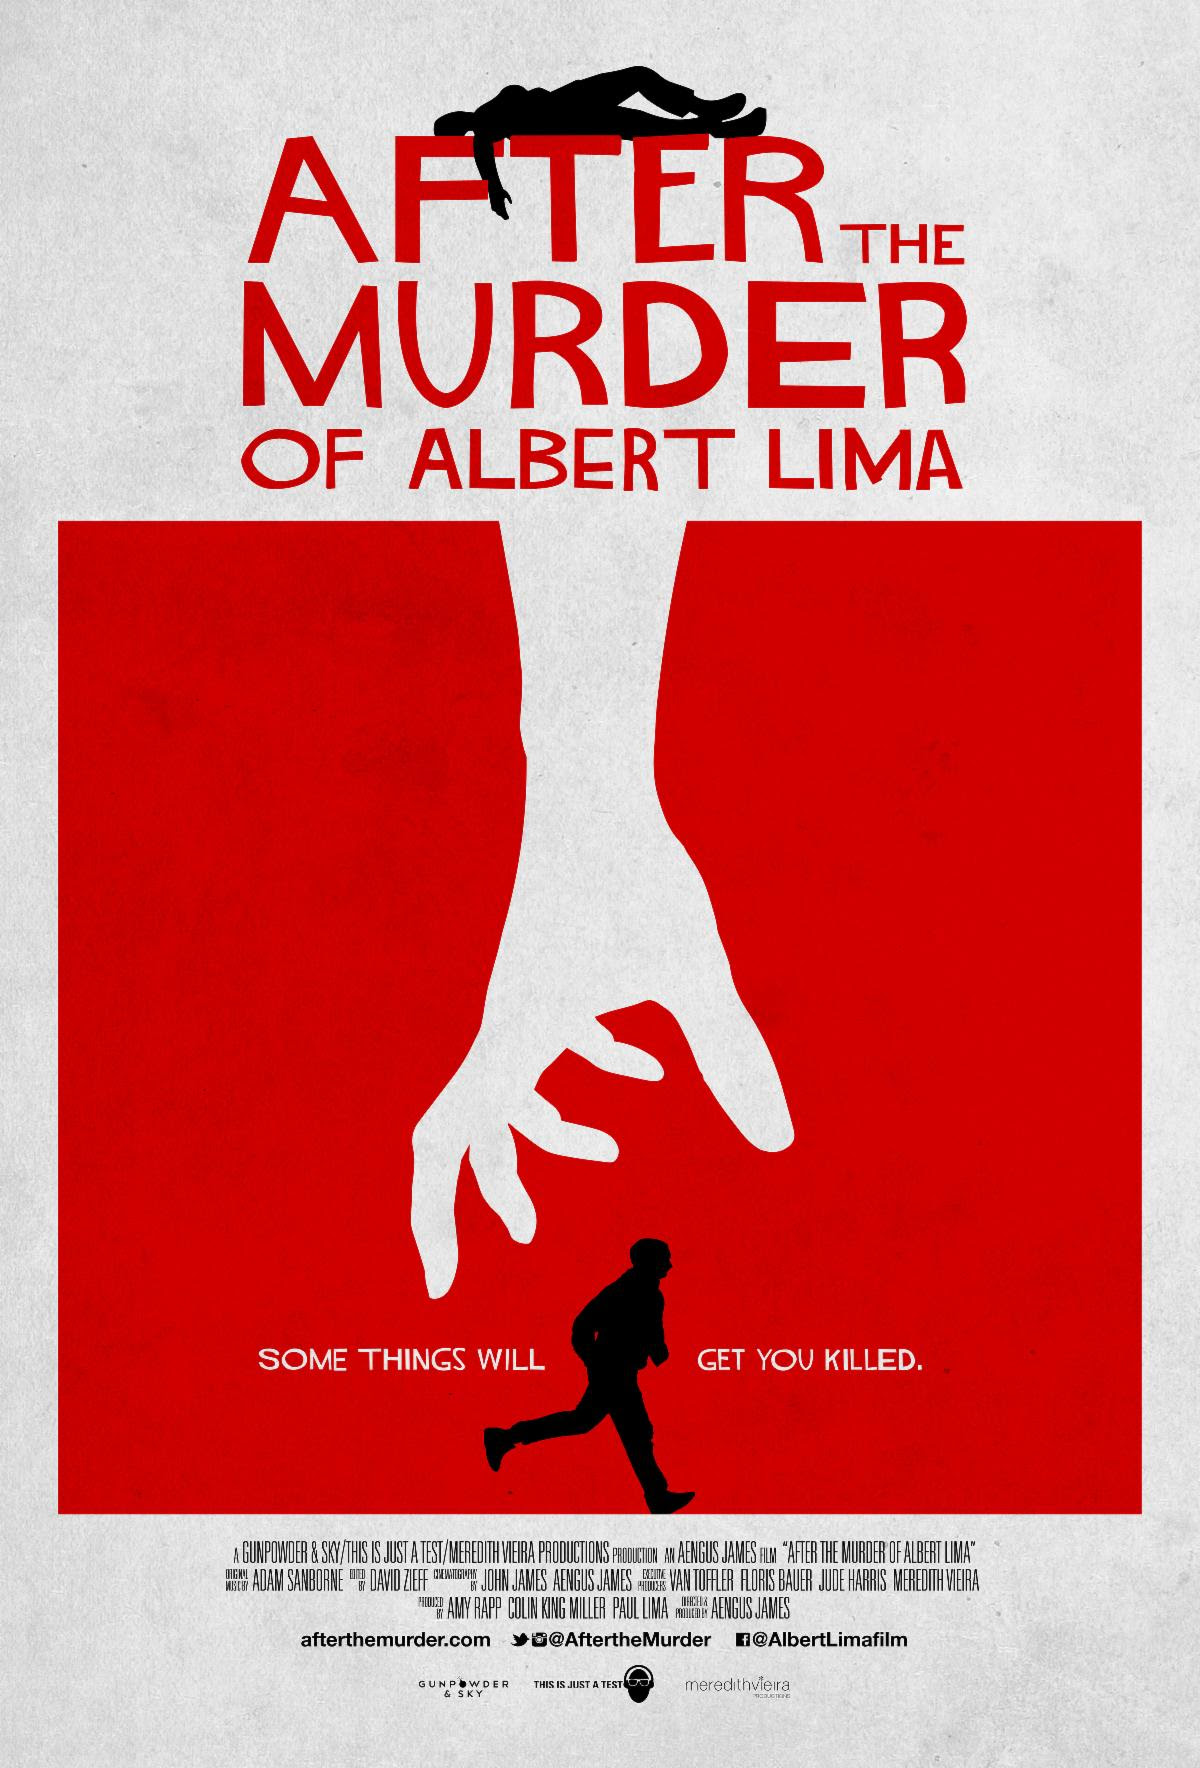 After the Murder of Albert Lima Image